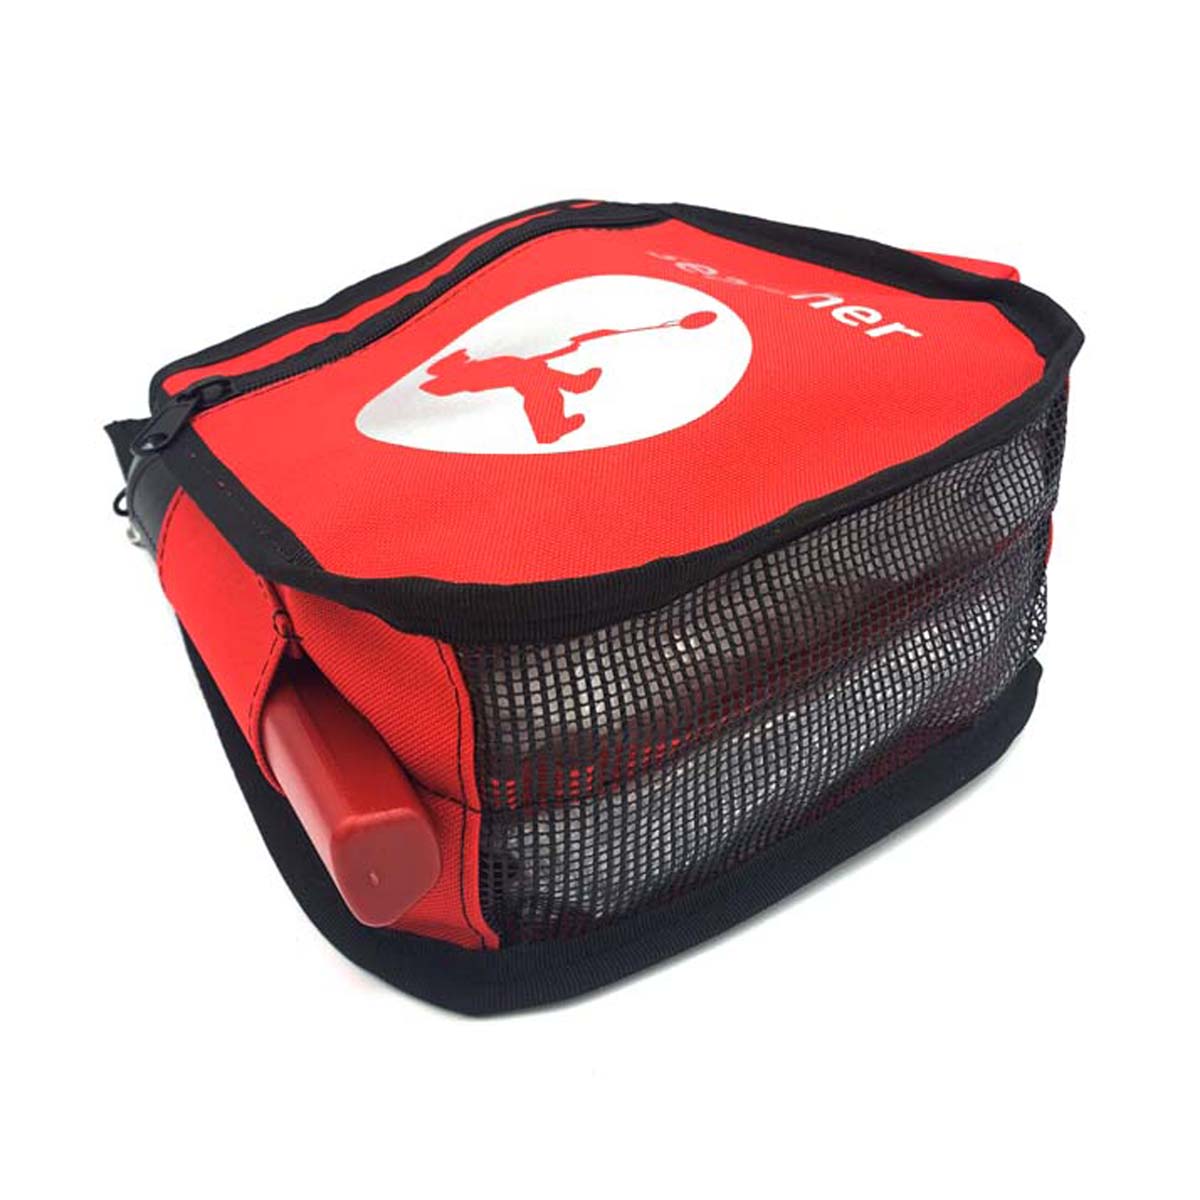 Searcher Finds + Tool PRO Bag - Red